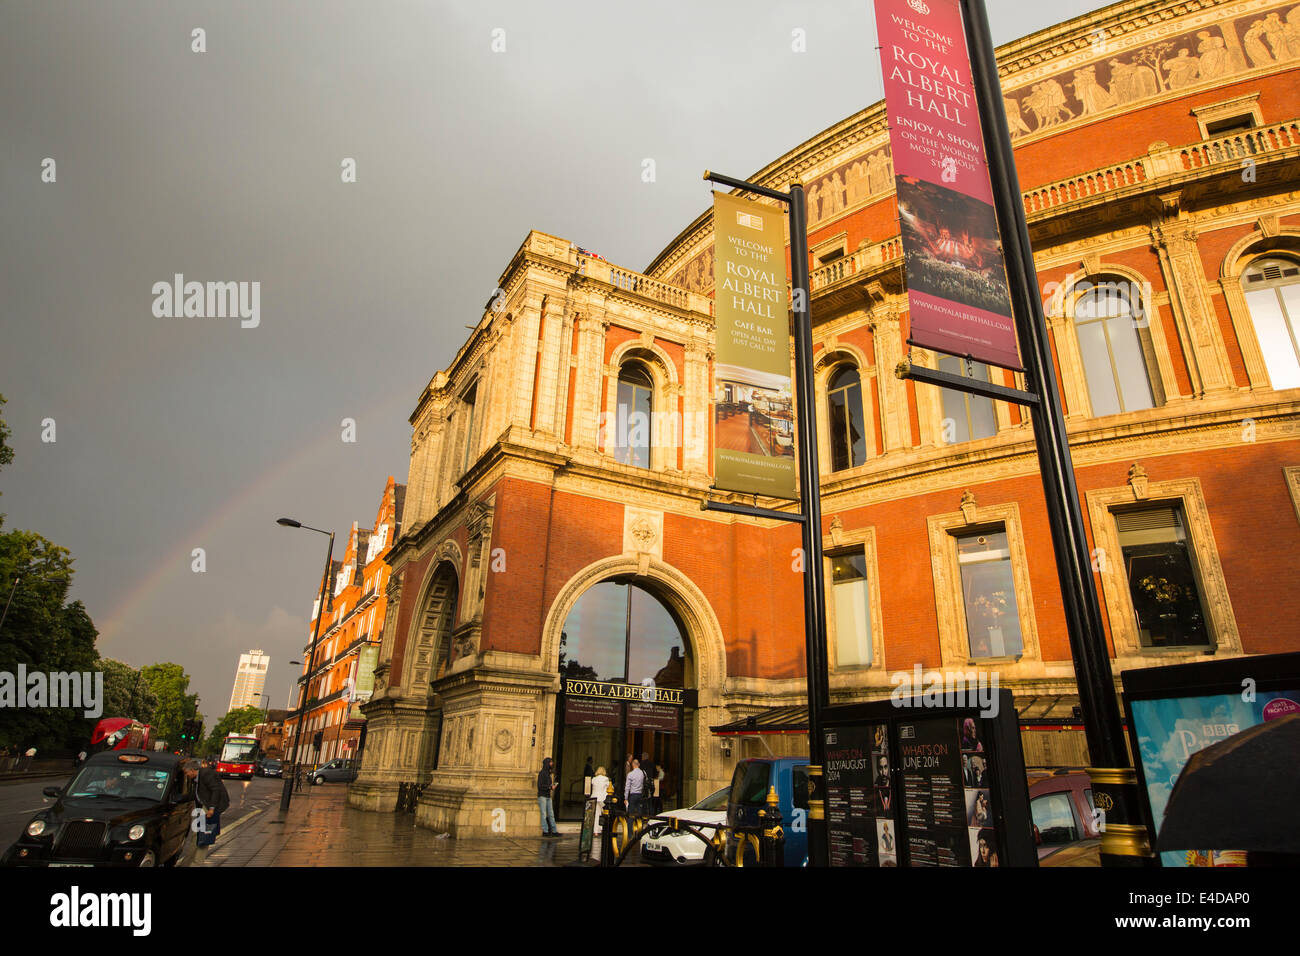 A rainbow over the Royal Albert Hall in London, UK. Stock Photo